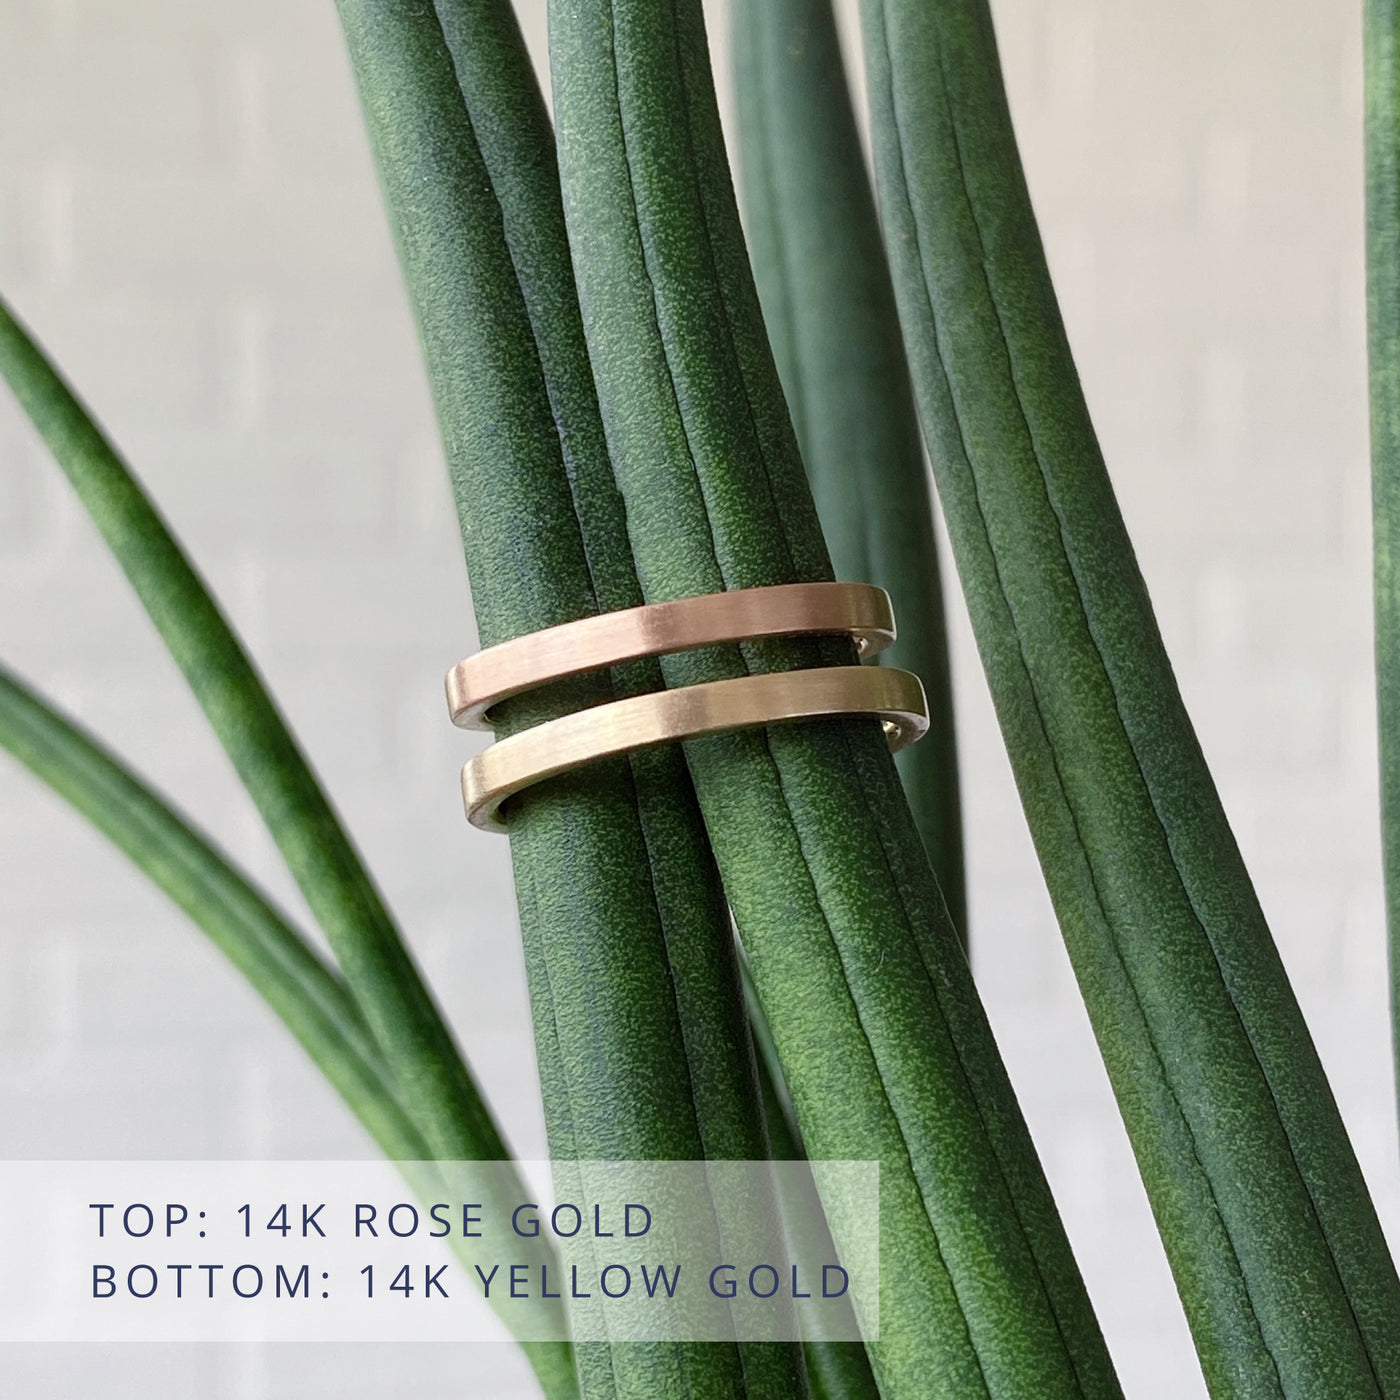 Thin Diablo flat brushed wedding bands in rose gold (top) and yellow gold (bottom) in natural light